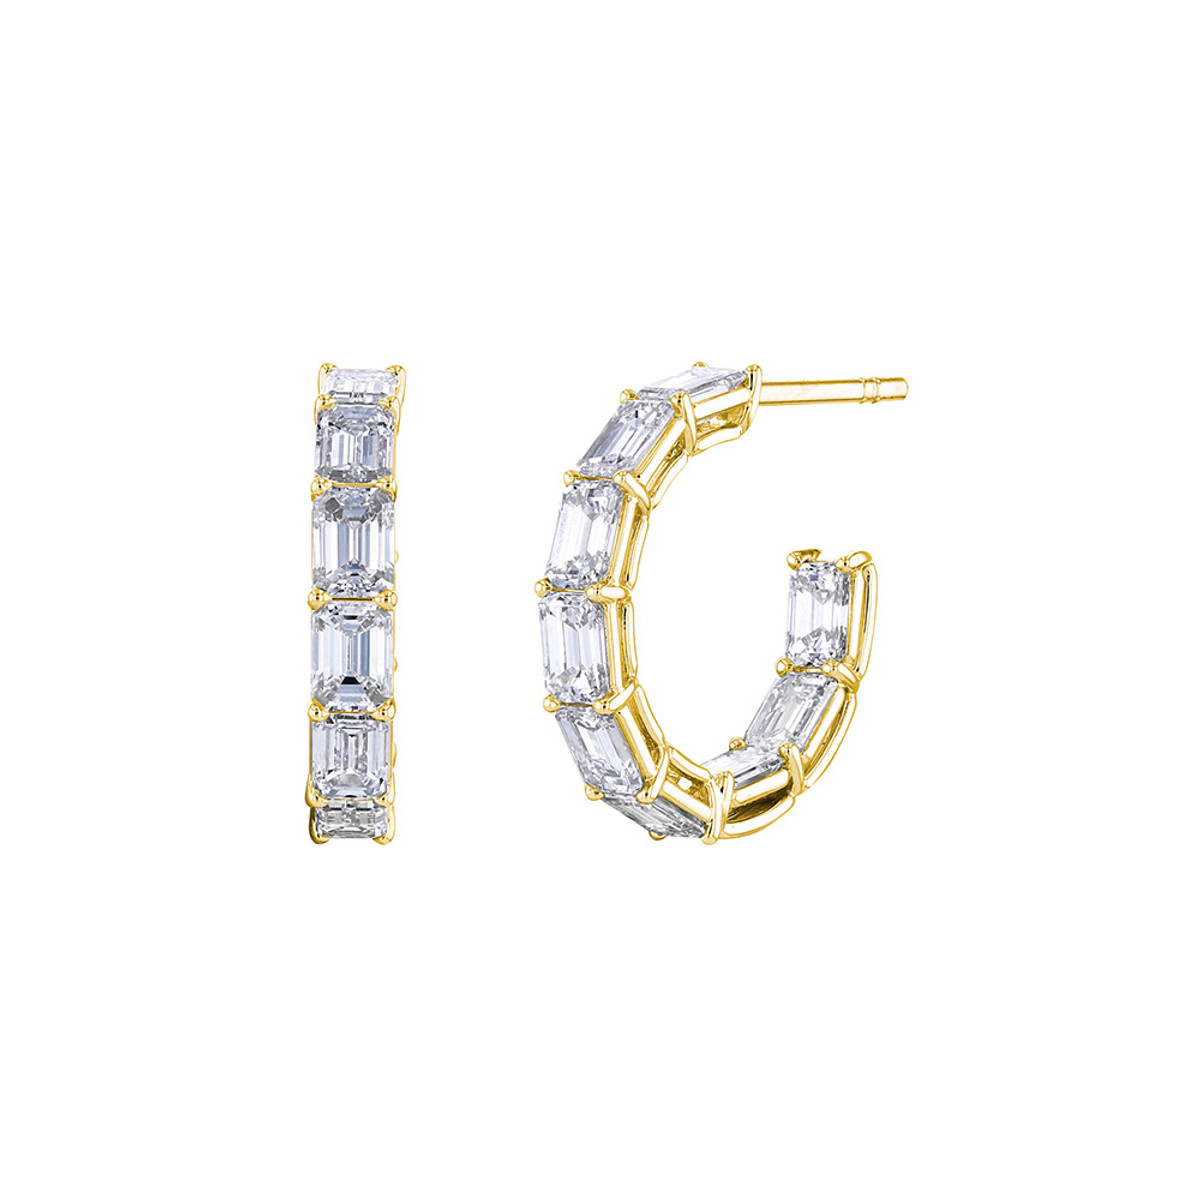 Hyde Park Collection 18K Yellow Gold Diamond Hoop Earrings-59195 Product Image